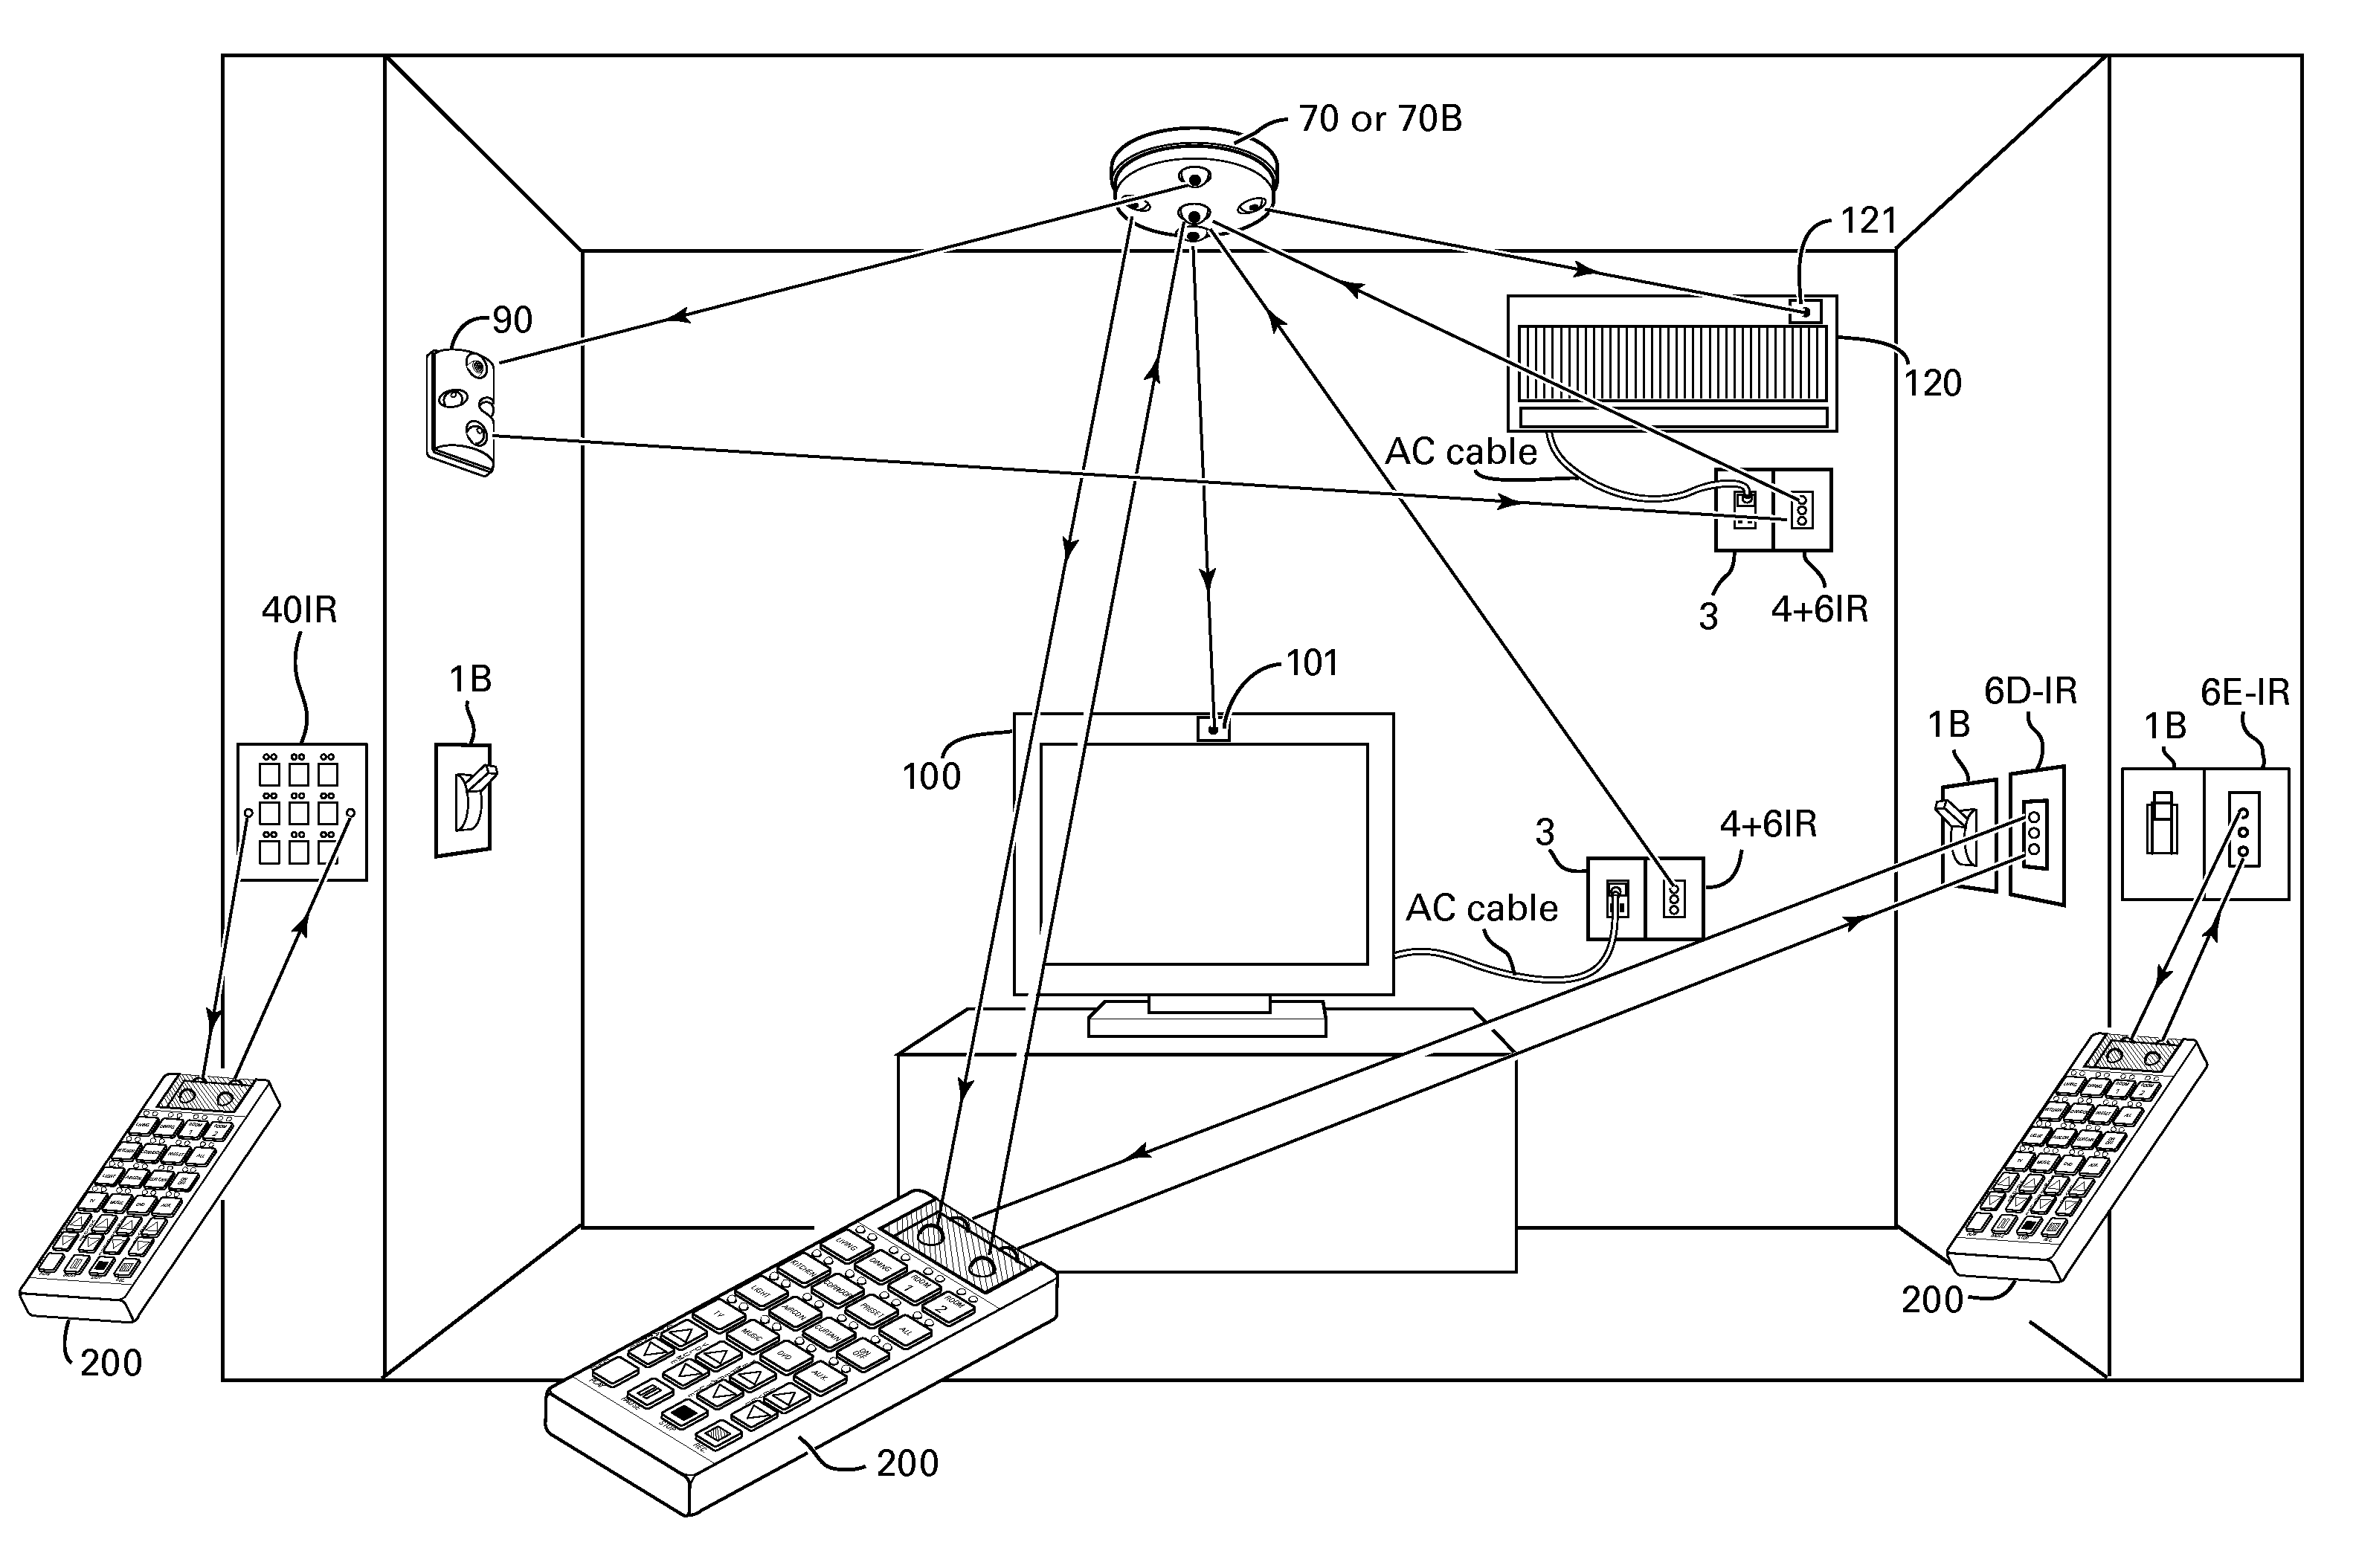 Method and Apparatus for Operating AC Powered Appliances Via Video Interphones, Two Way IR Drivers and Remote Control Devices